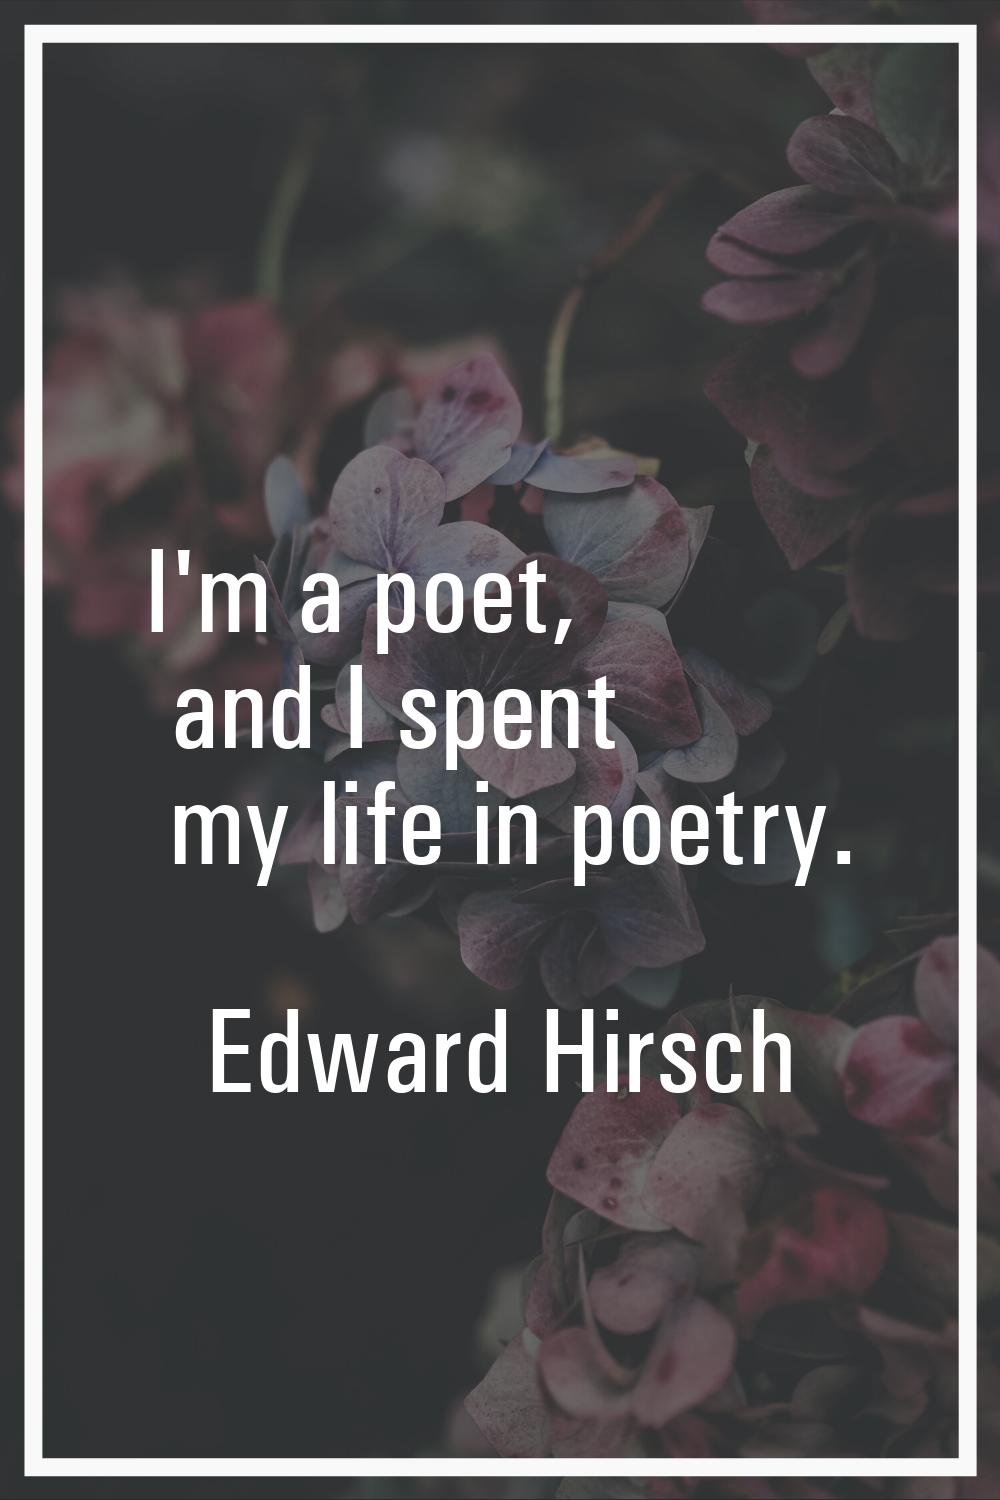 I'm a poet, and I spent my life in poetry.